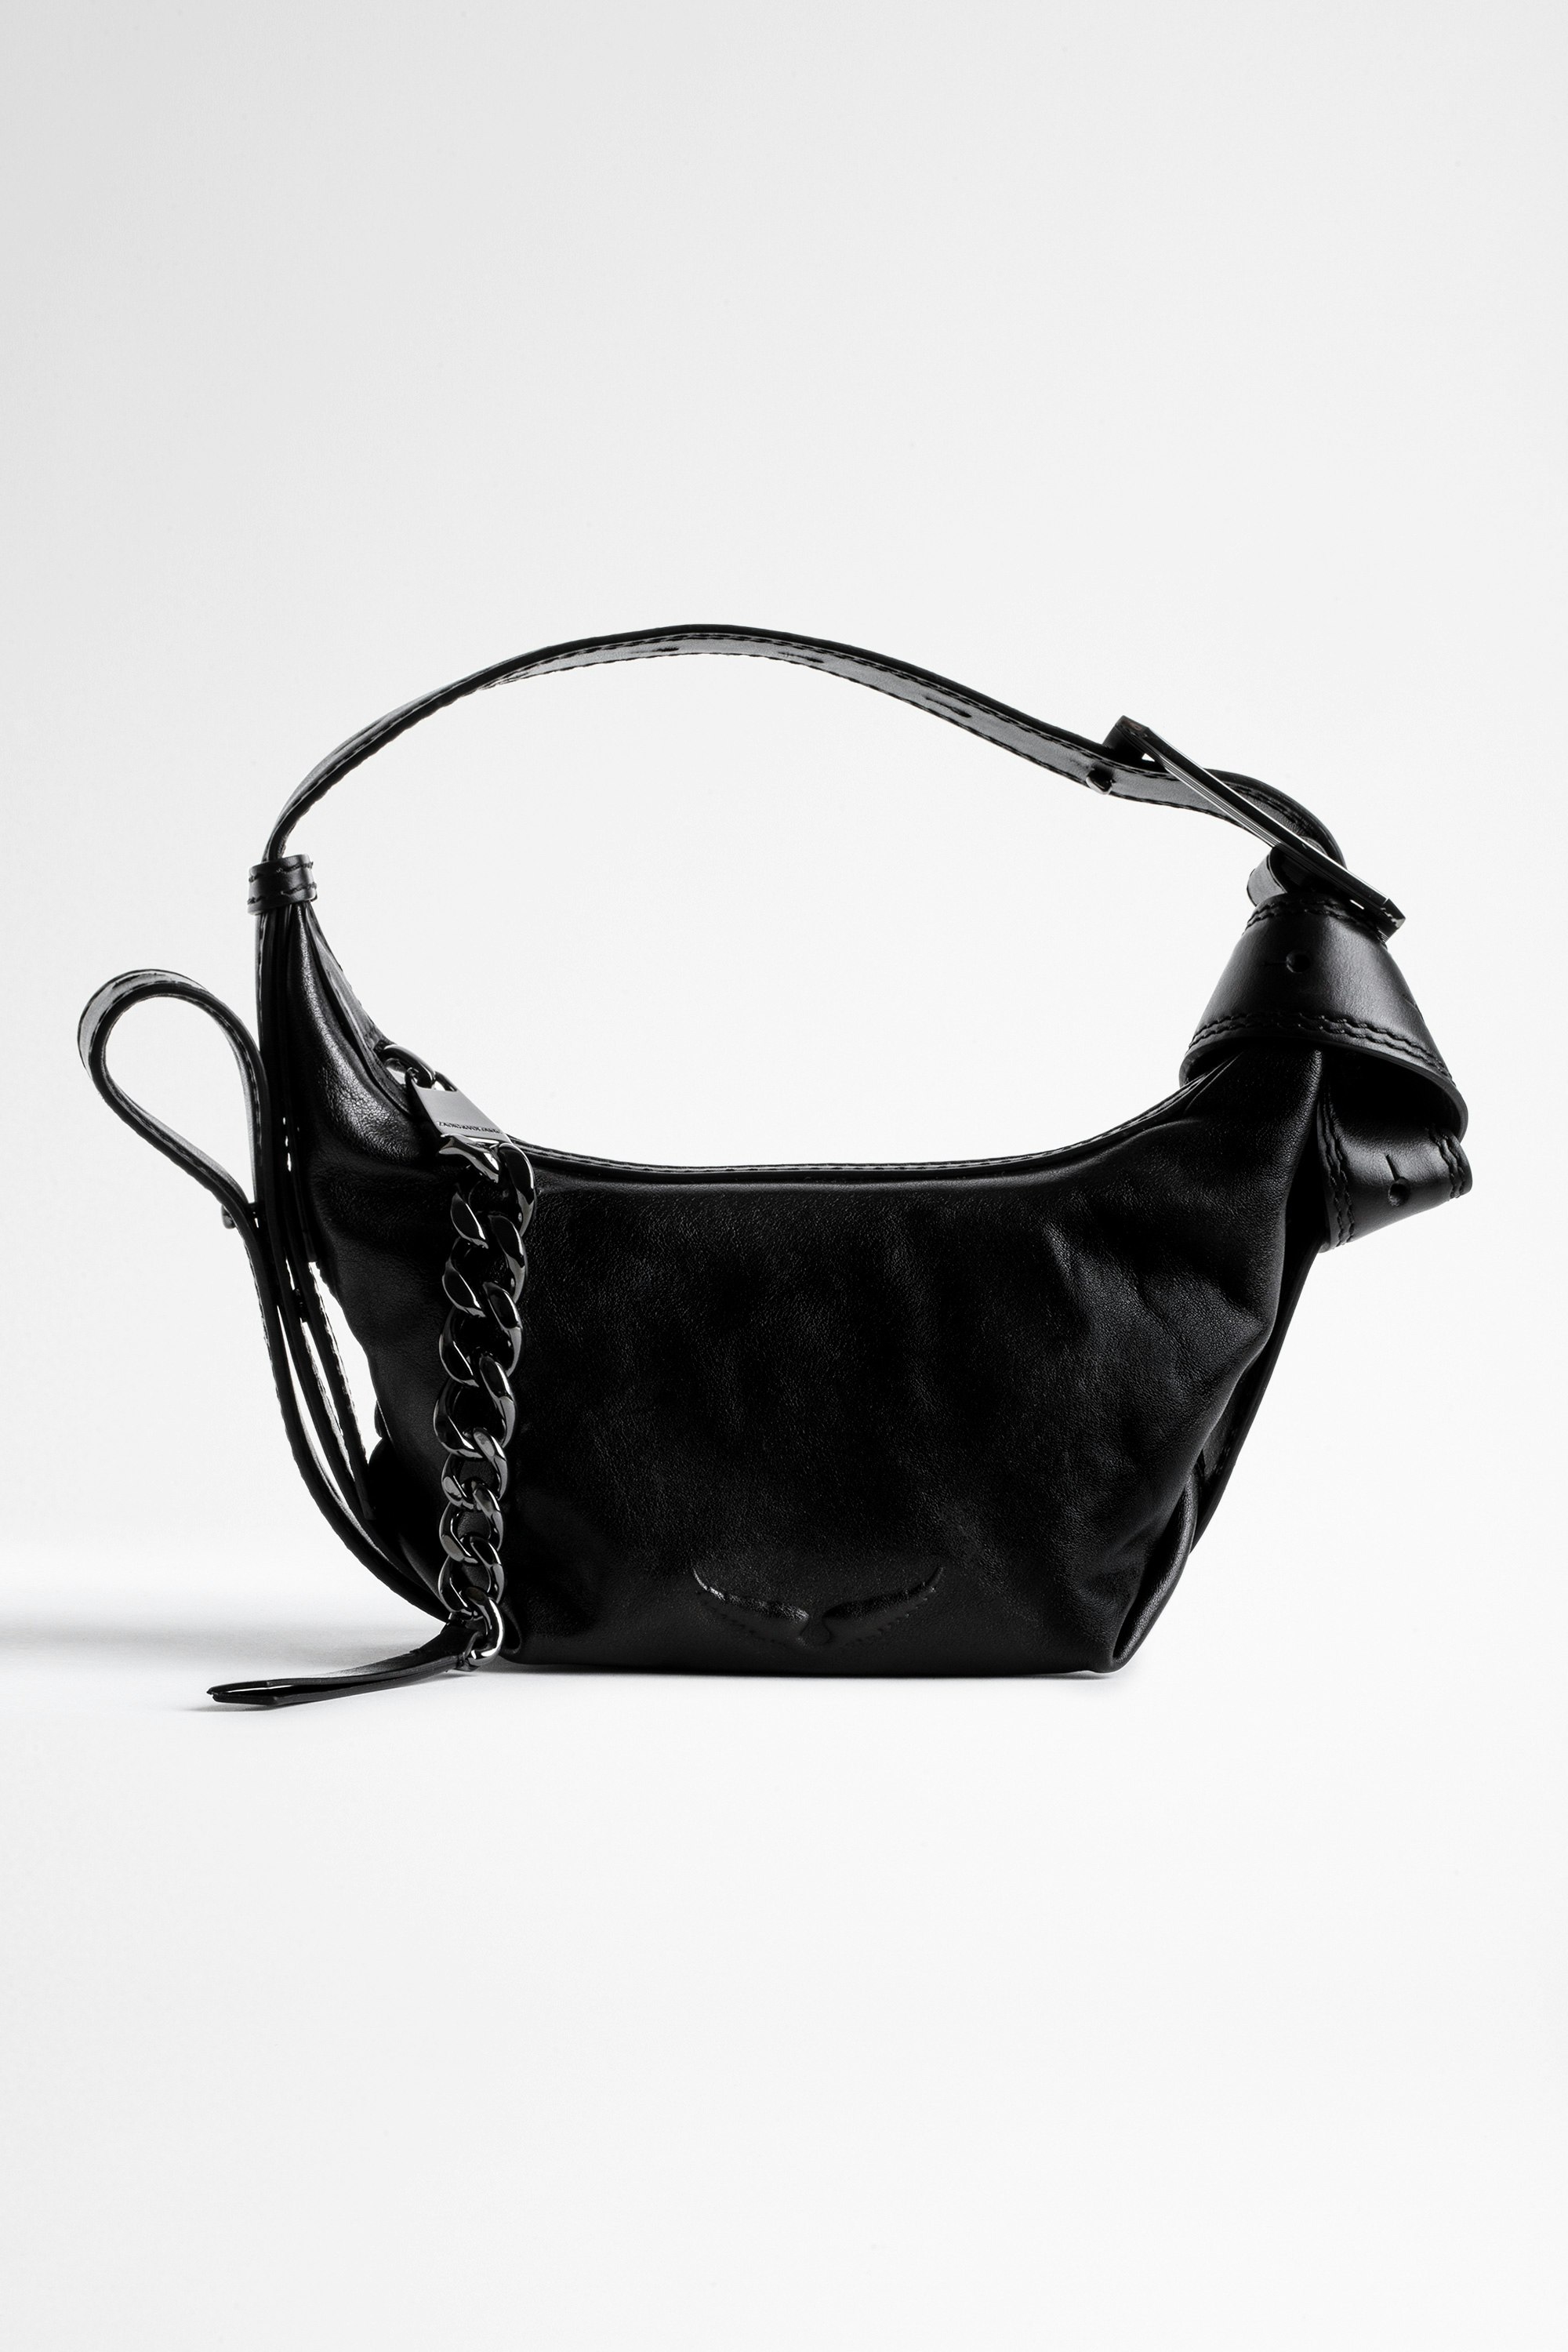 Le Cecilia XS バッグ - Cecilia XS bag in black vegetable dyeing leather